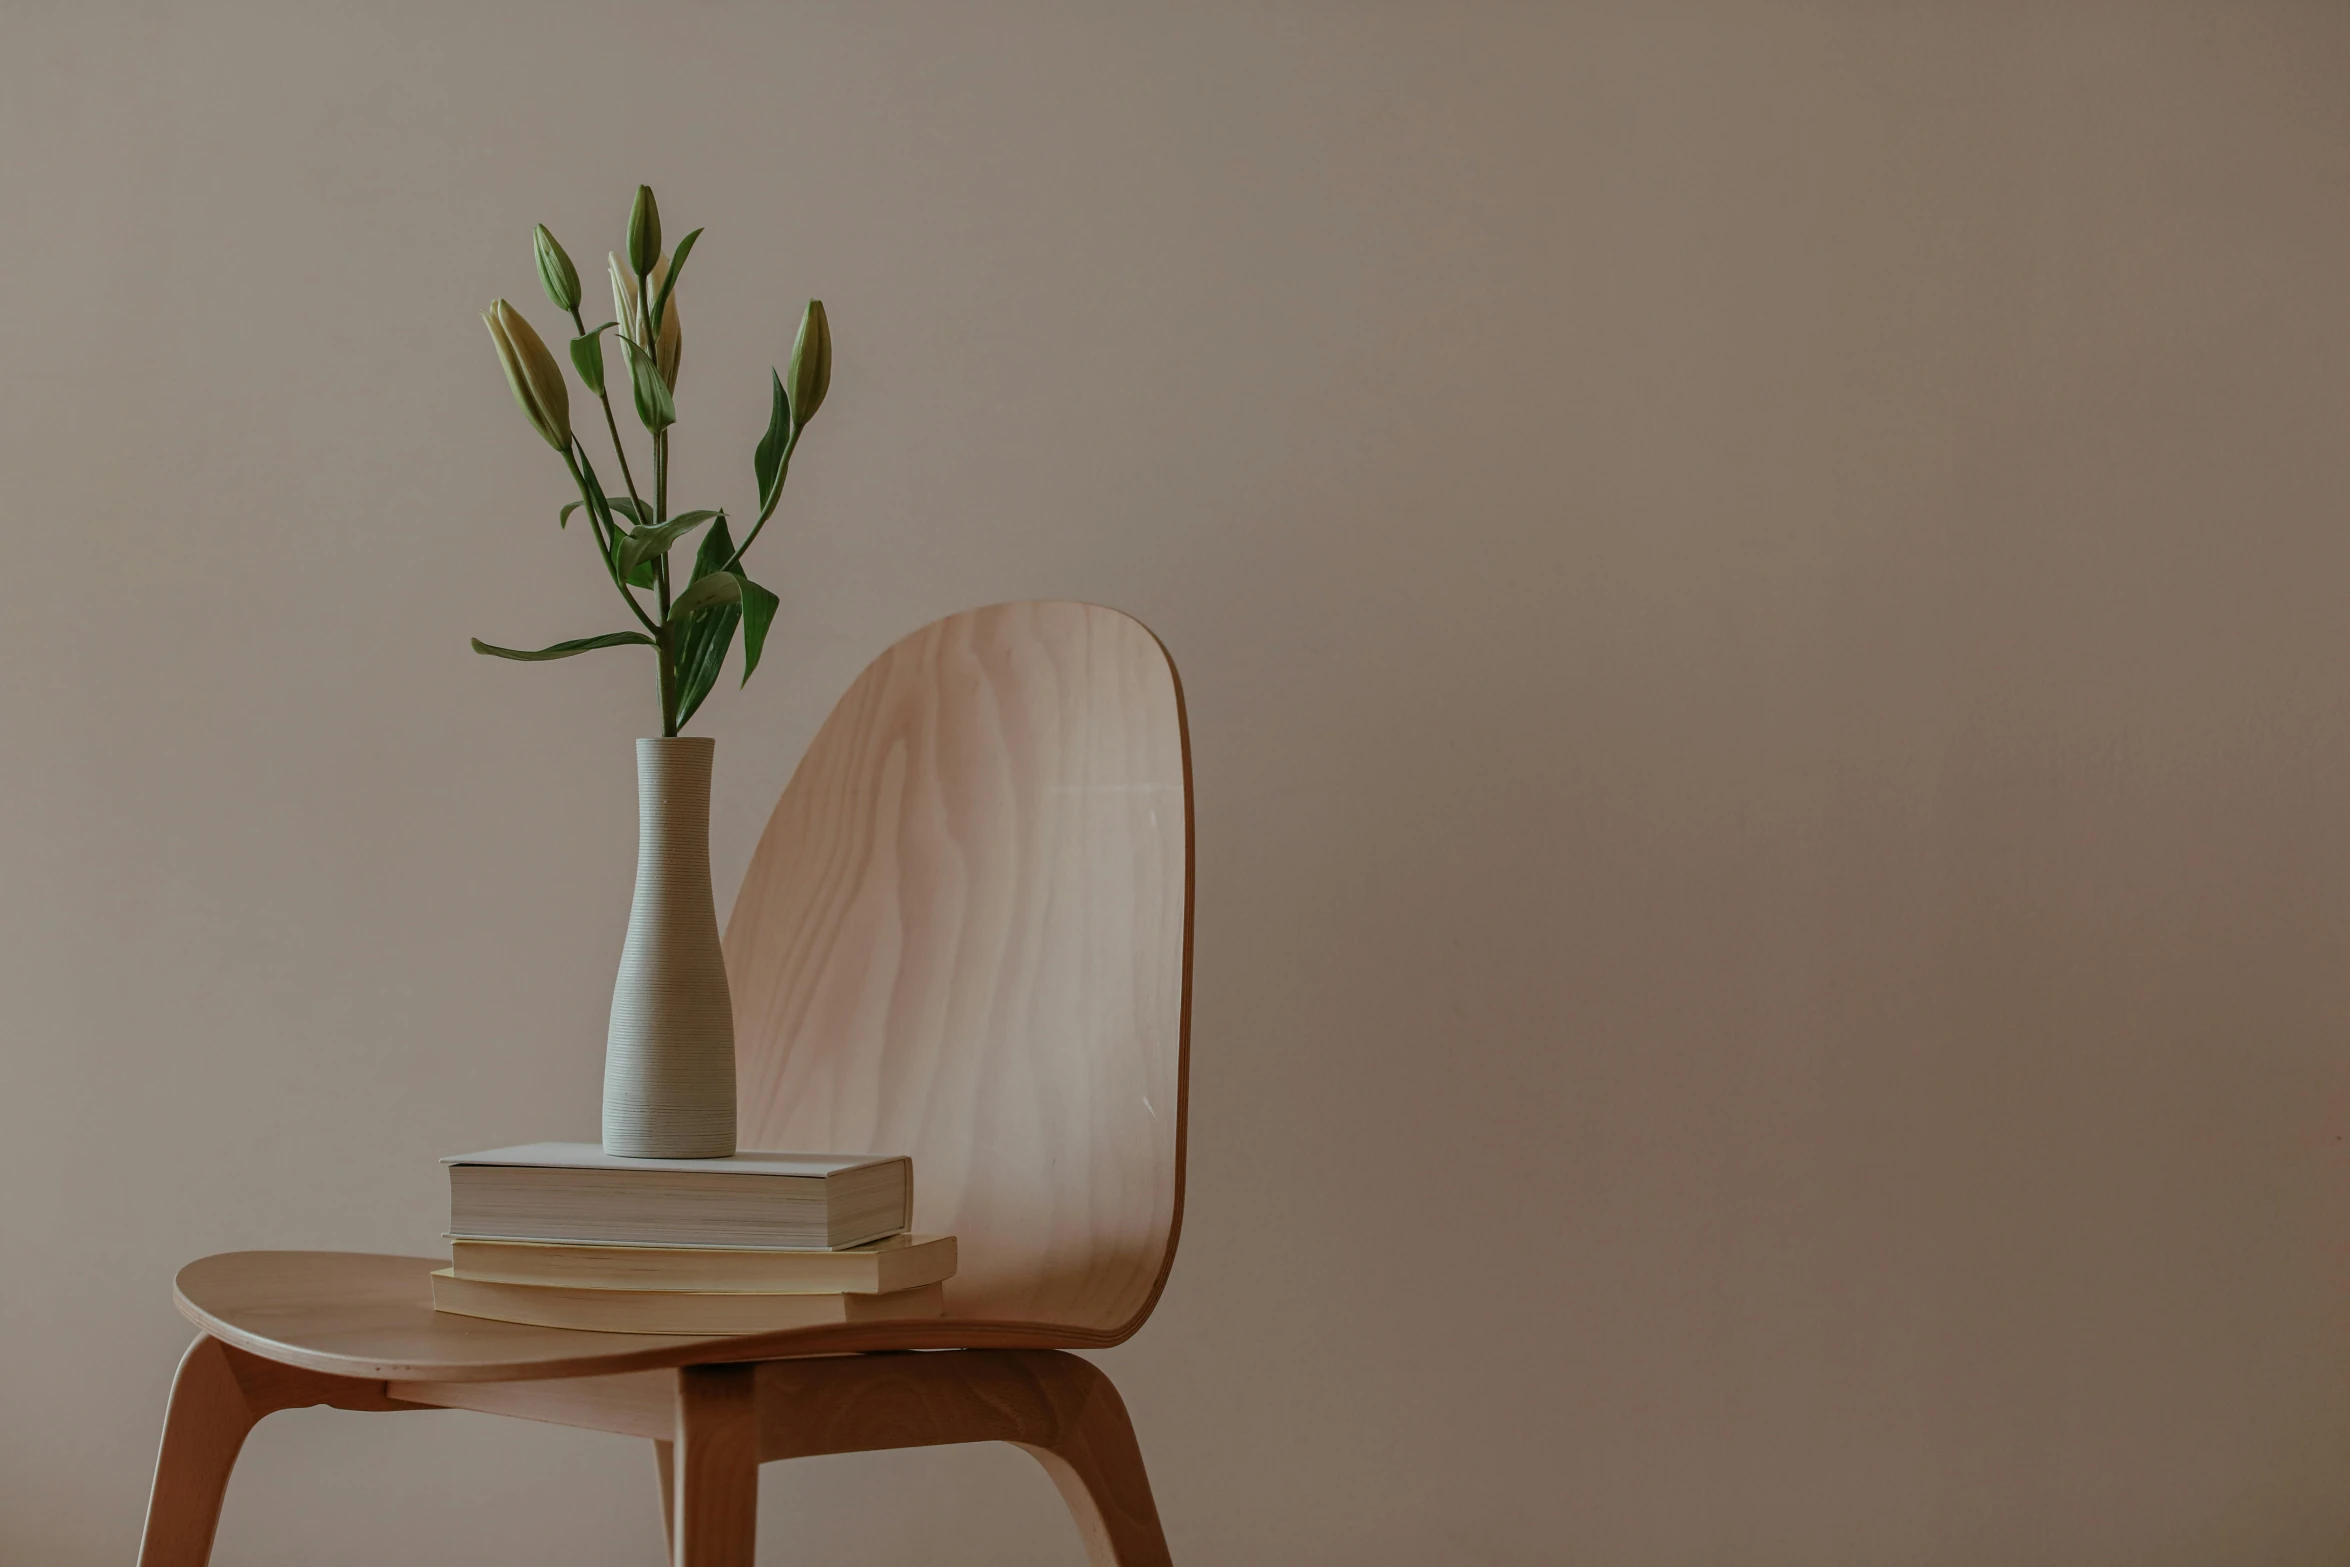 a white vase sitting on top of a wooden chair, inspired by Constantin Hansen, unsplash contest winner, beige color scheme, books and flowers, studio quality smooth render, looking to the right